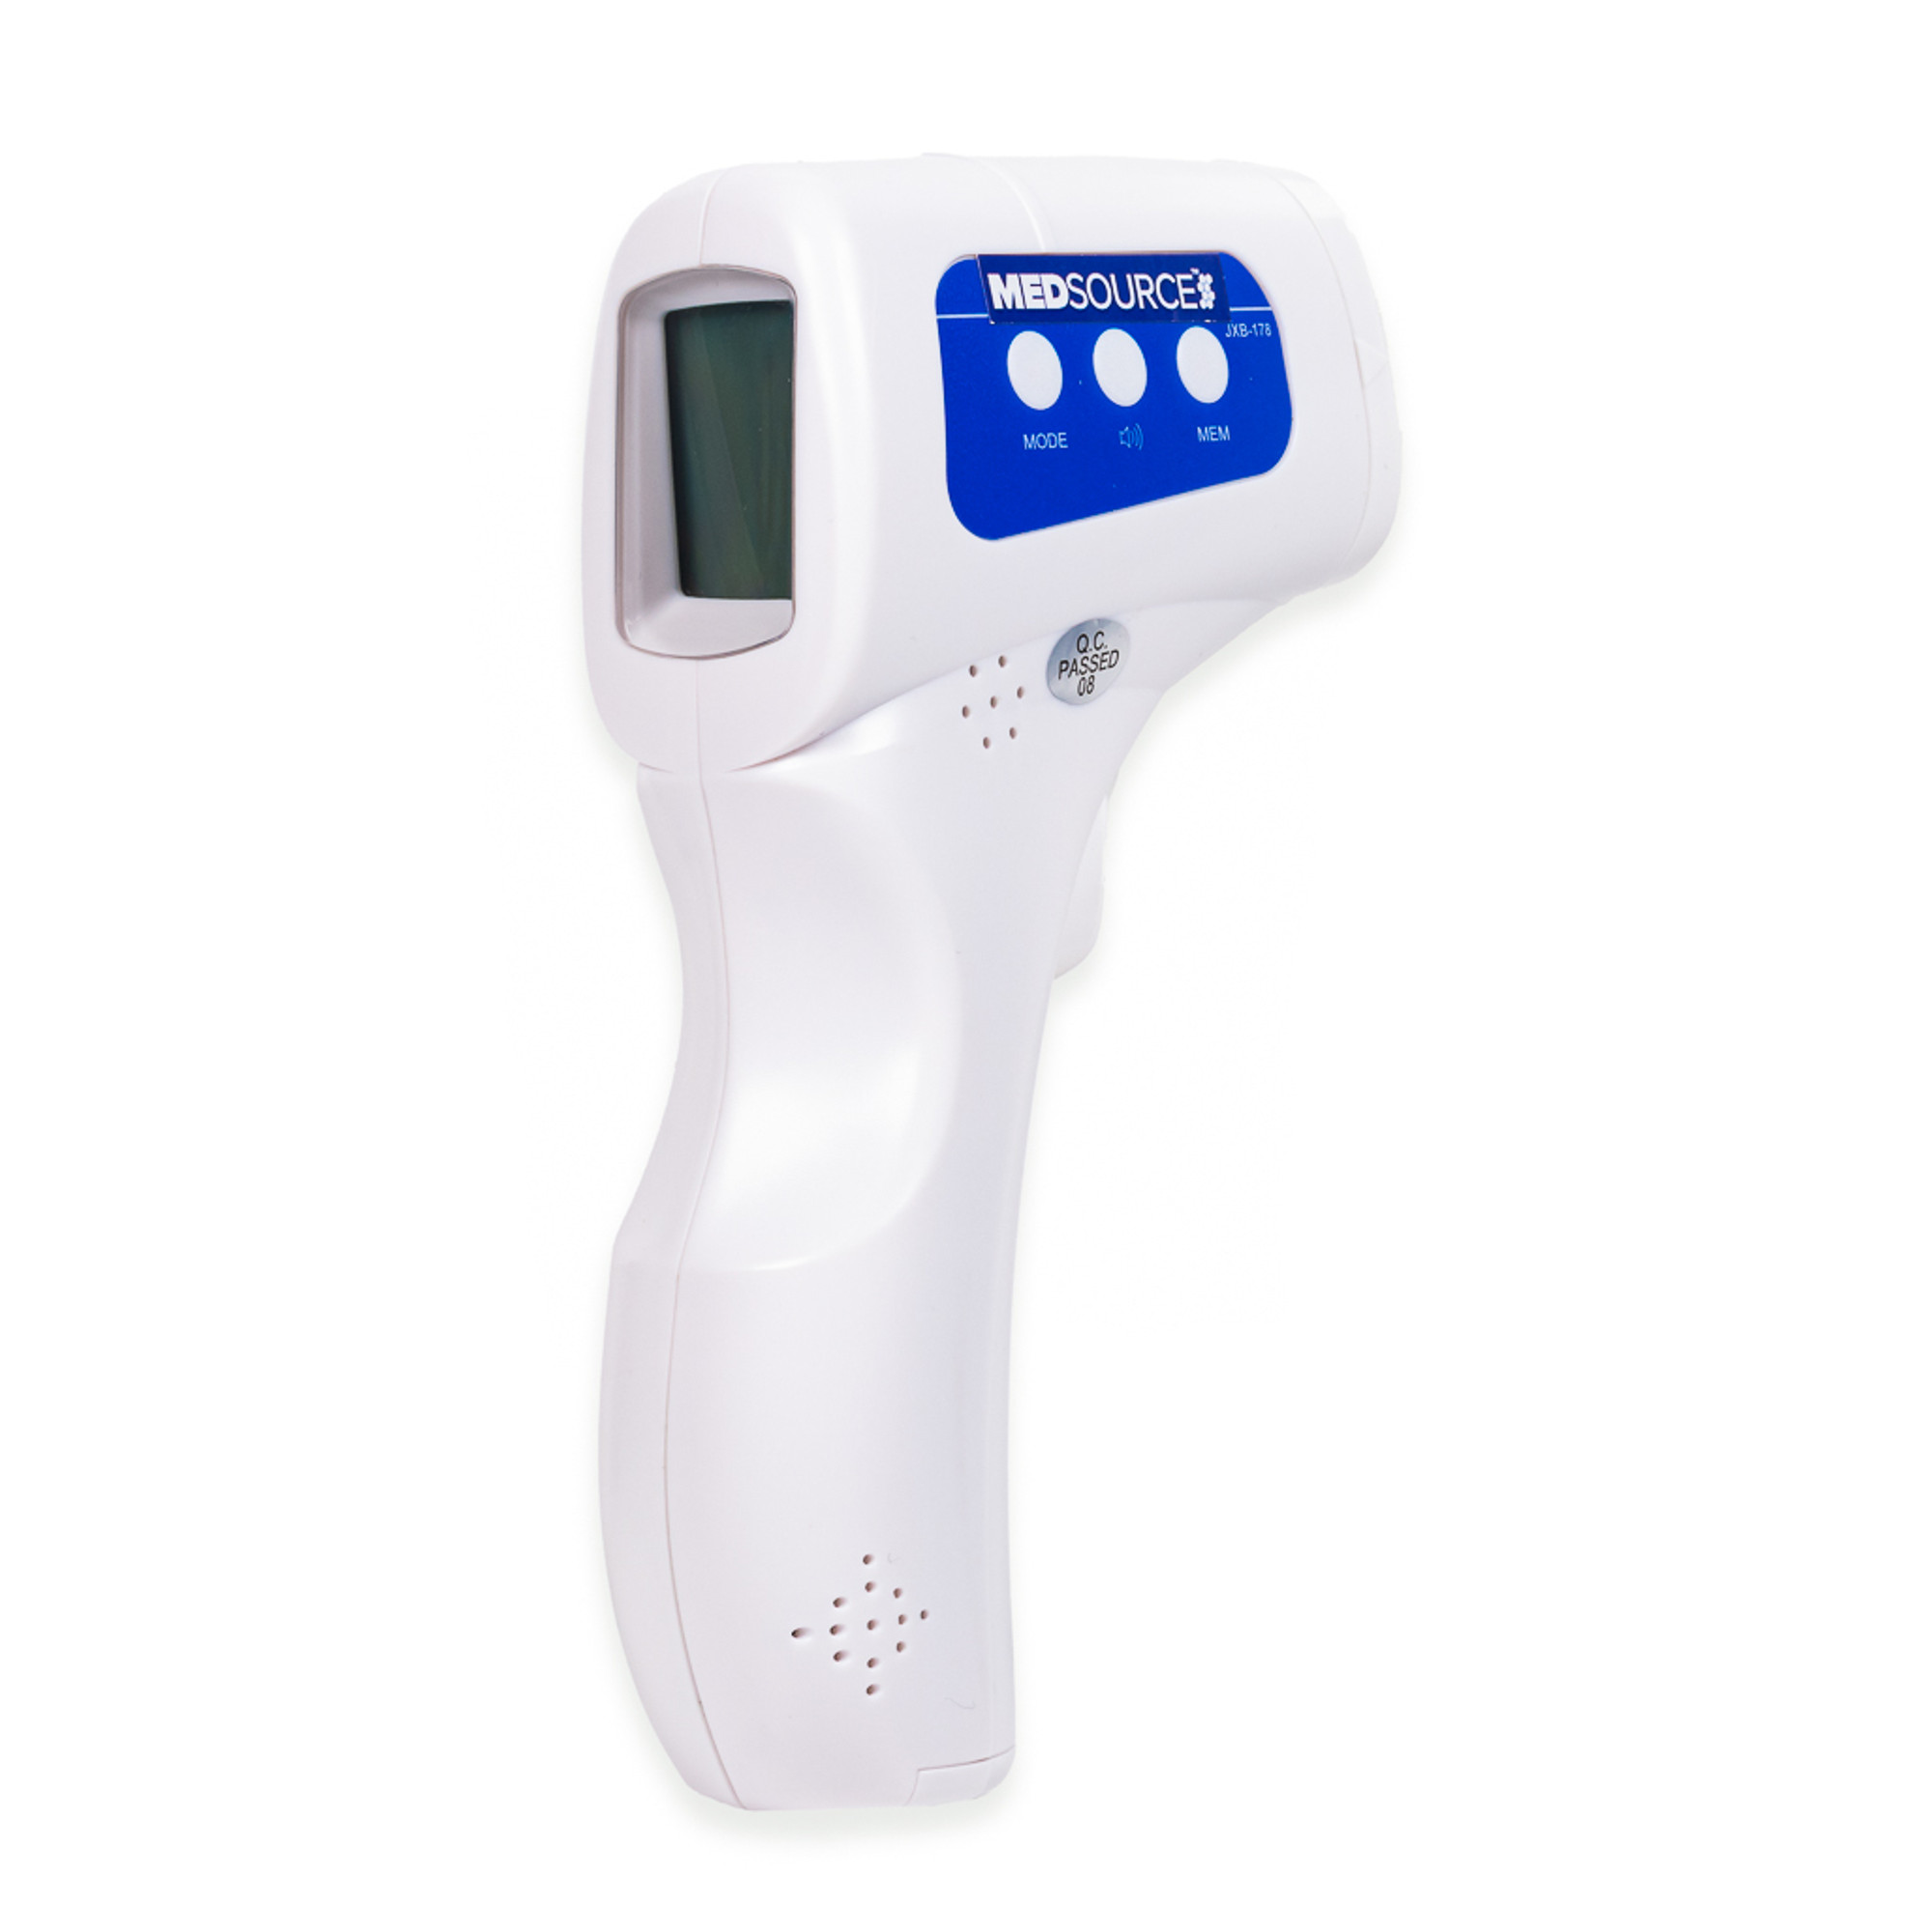 https://cdn11.bigcommerce.com/s-benodx/images/stencil/2000x2000/products/2870/5519/Non_Contact_Infrared_Thermometer_-_FDA_Approved-3__95884.1660245412.jpg?c=2